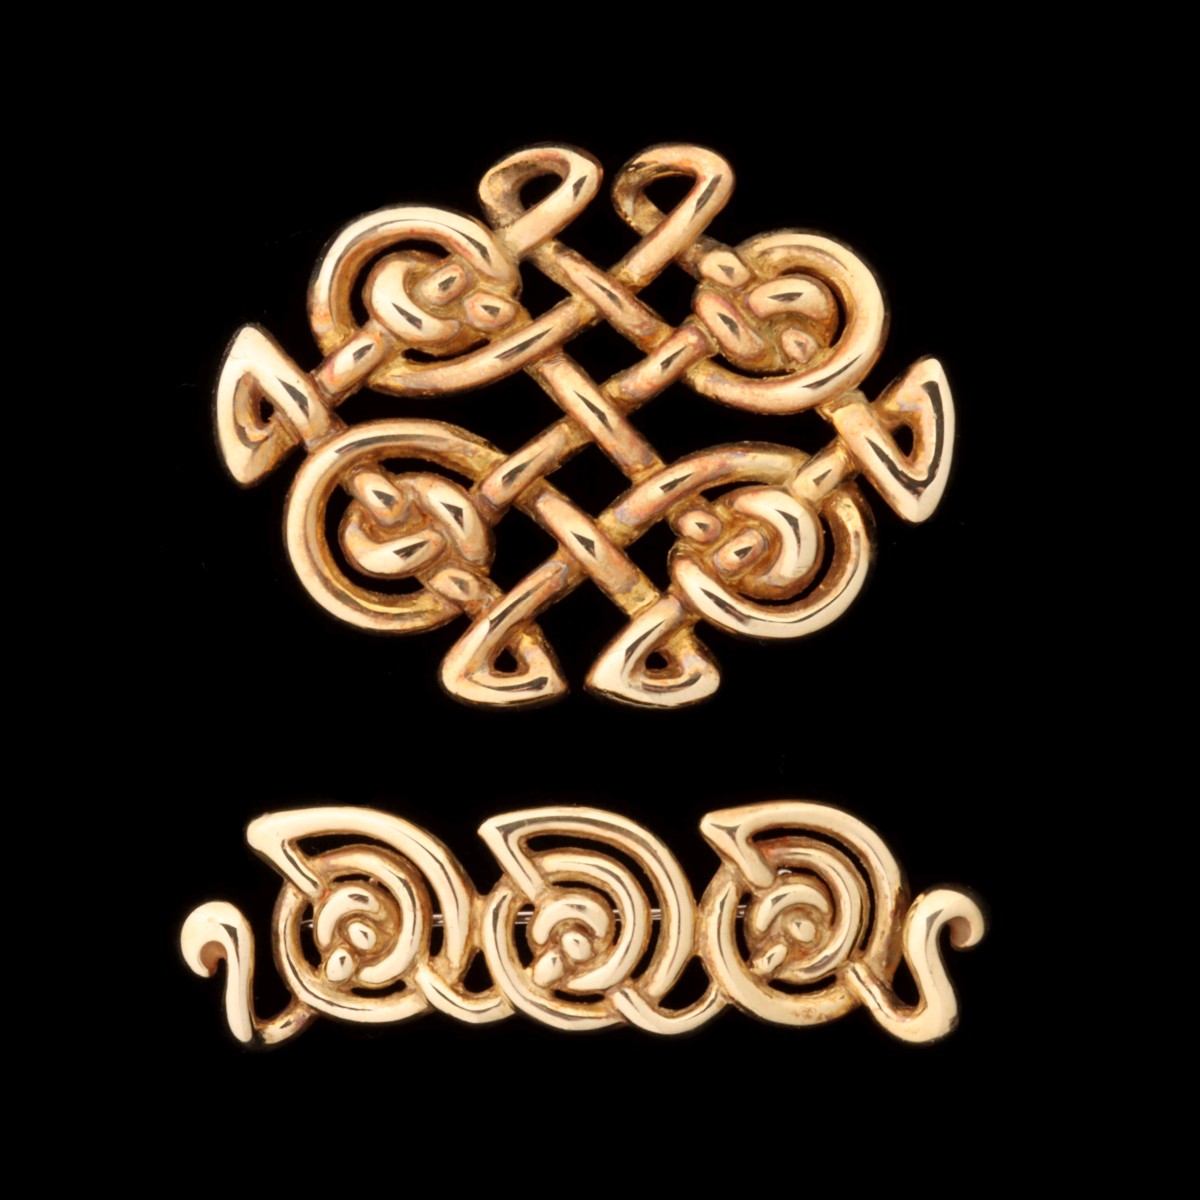 KARAT GOLD PINS WROUGHT IN THE MANNER OF A CELTIC KNOT